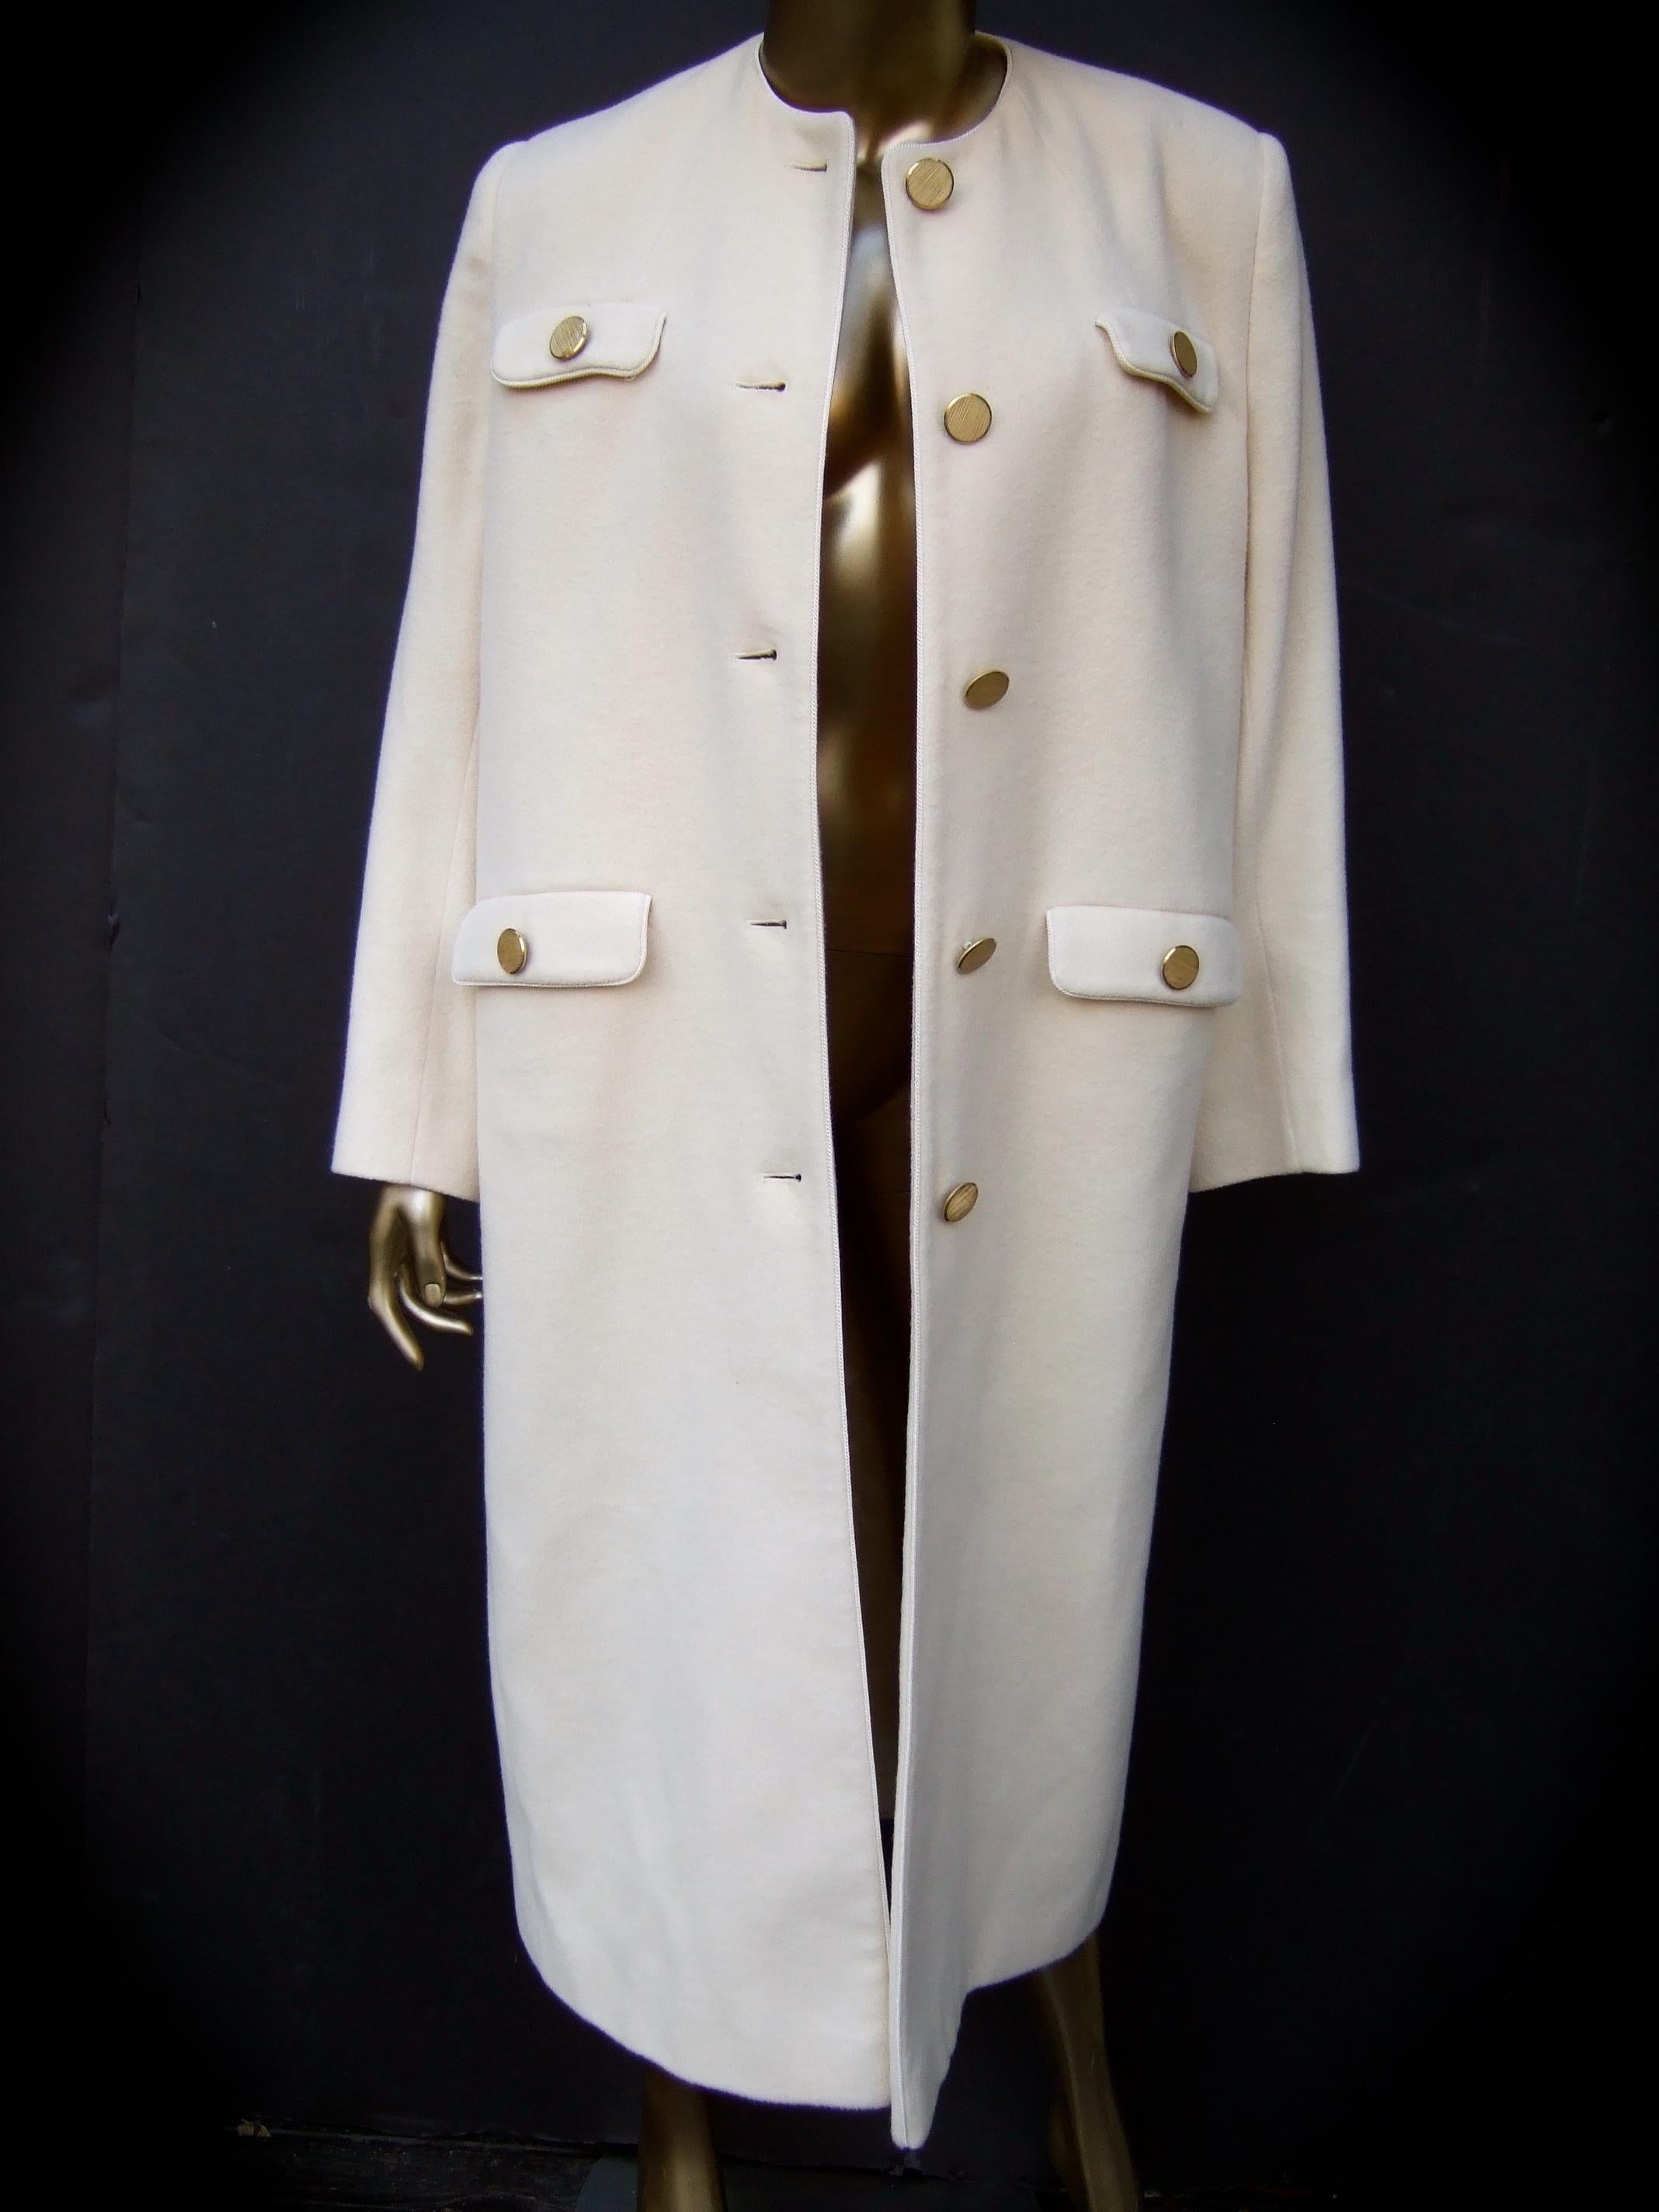 Luxurious cashmere creme winter white coat designed by Montaldo's c 1970s
The stylish coat is constructed with plush creme color cashmere 
Adorned with brushed matte gilt metal buttons that have a subtle military 
uniform influence 

Designed with a